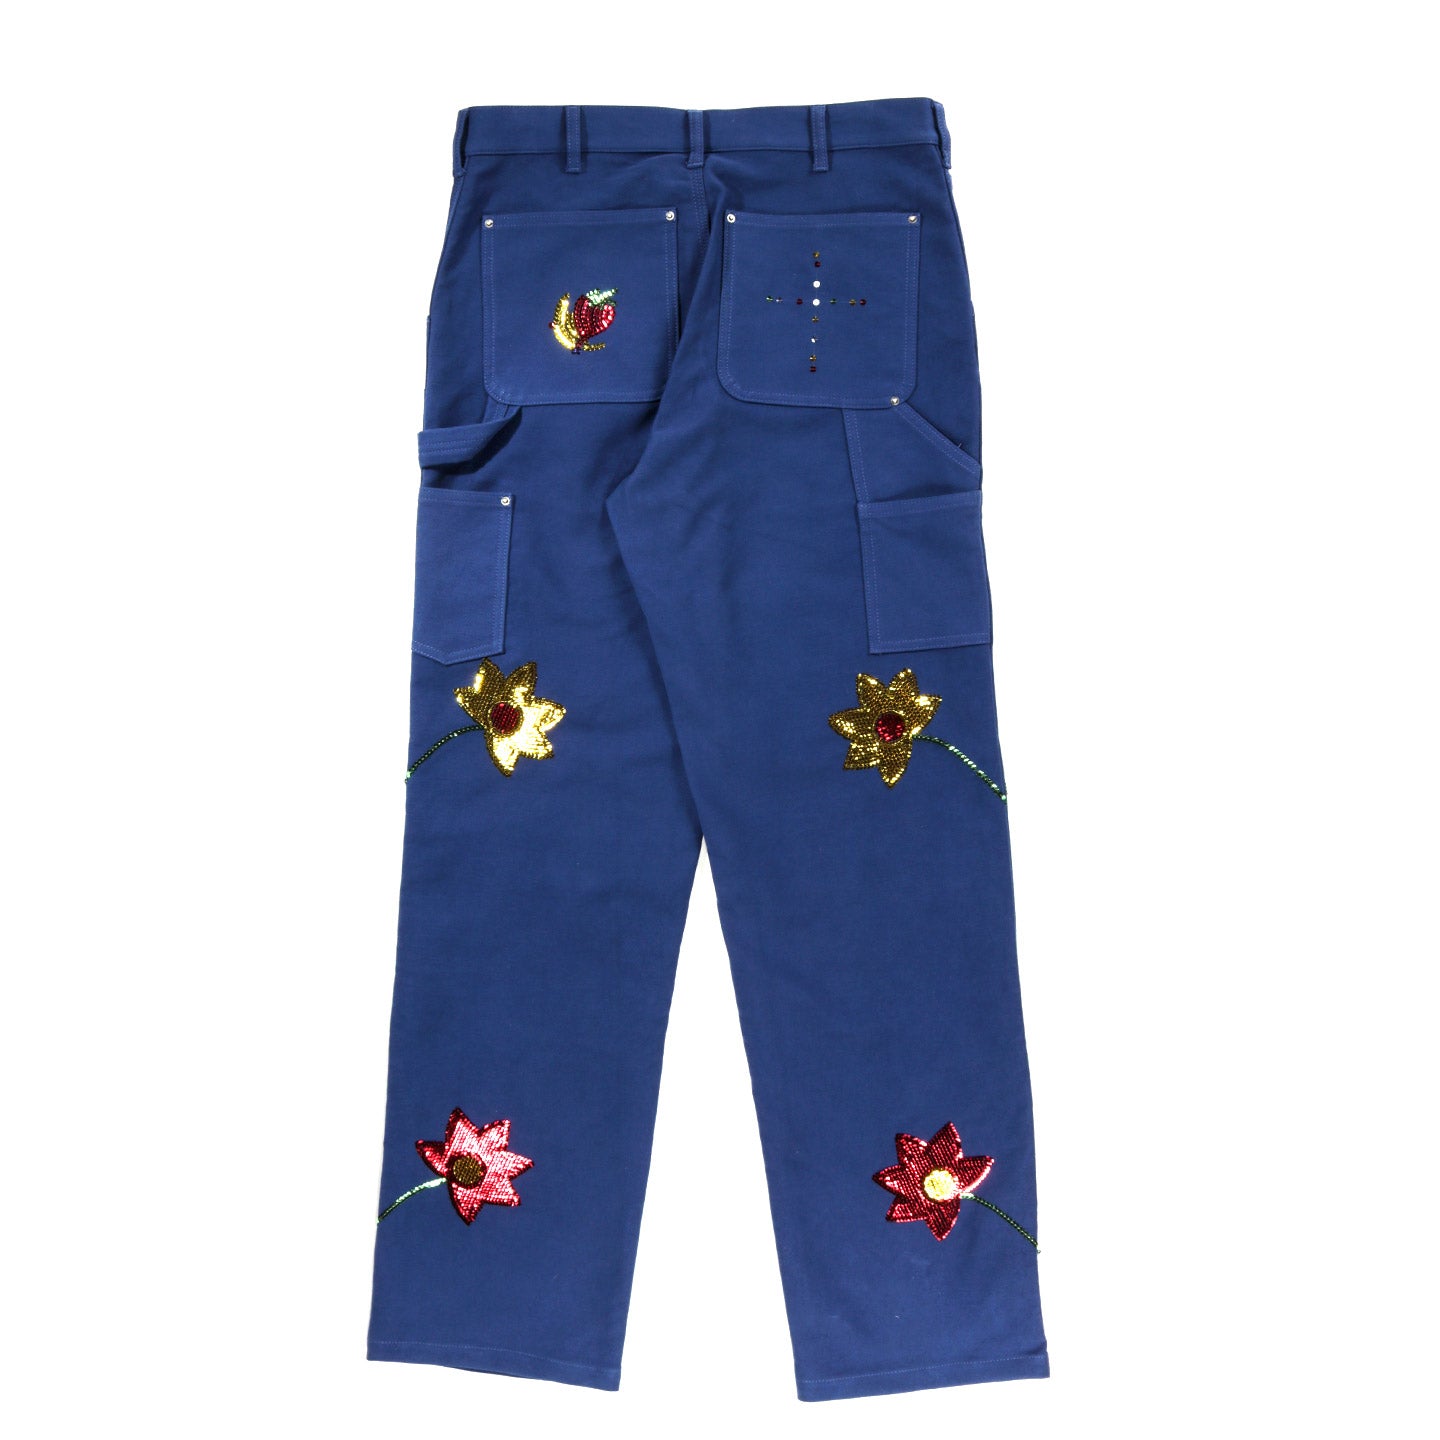 SKY HIGH FARM WORKWEAR SEQUIN EMBROIDERED FLOWERS WORKWEAR DOUBLE KNEE PANTS BLUE